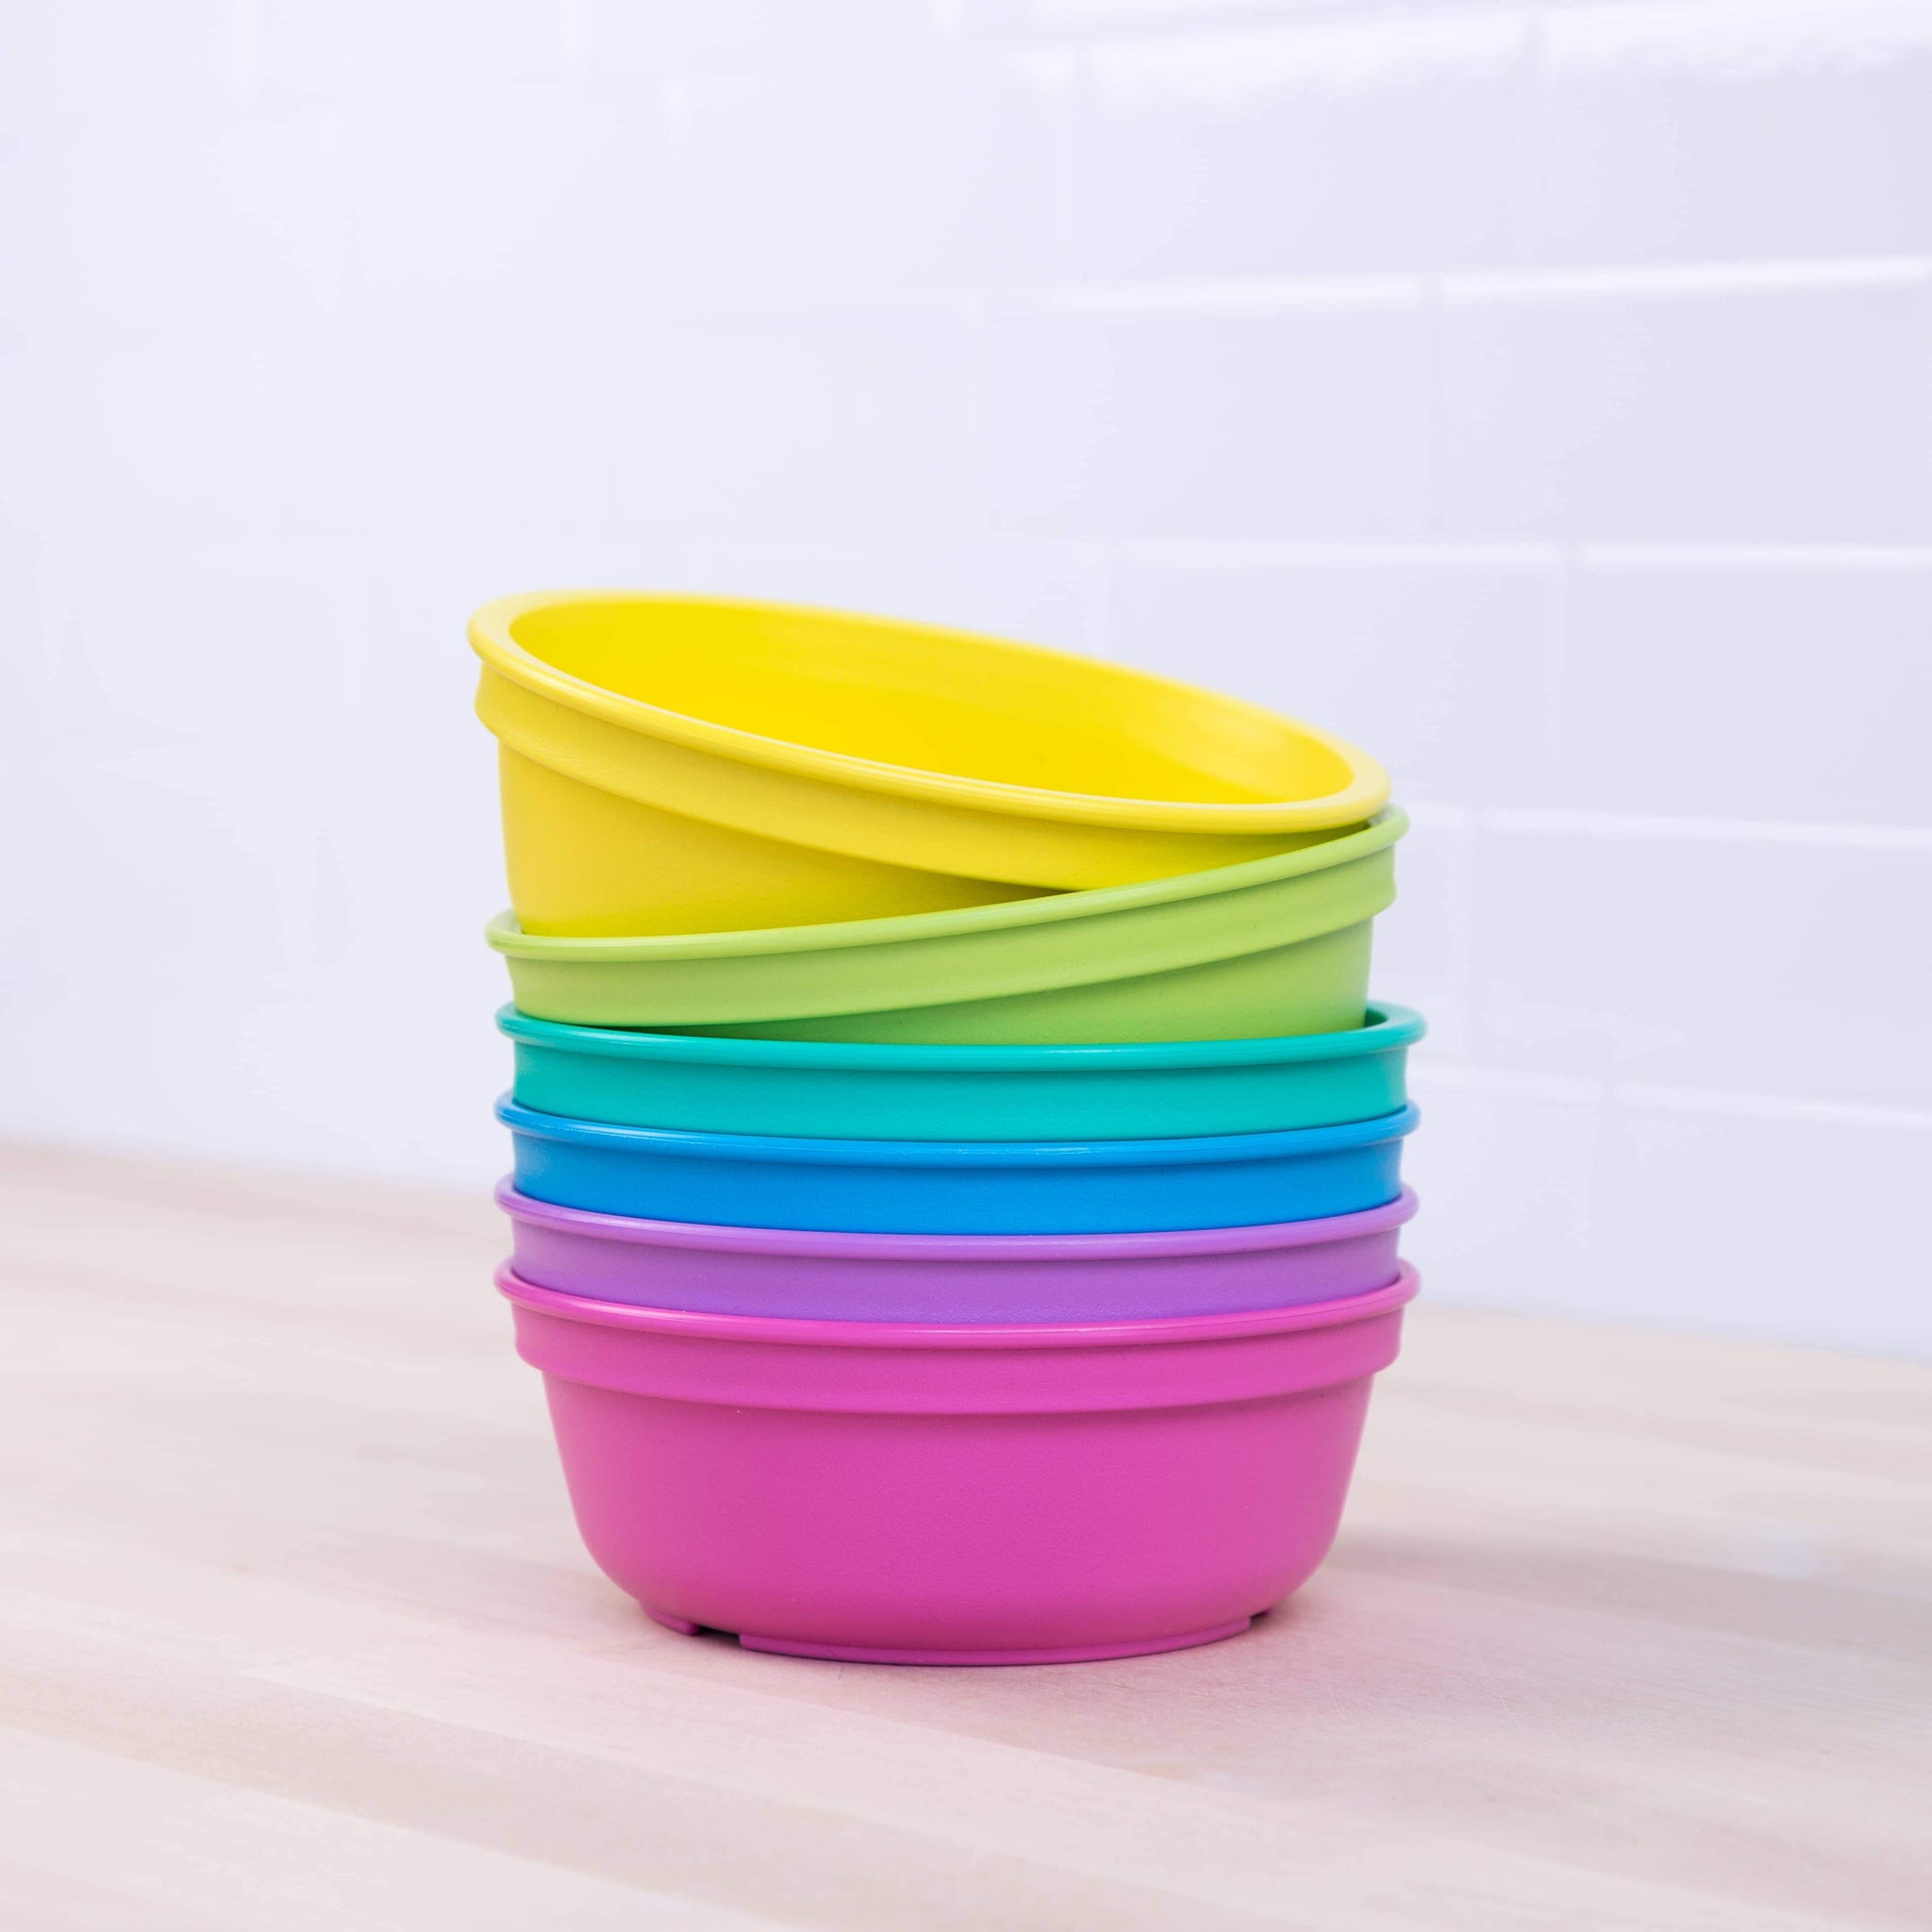 Re-Play Toddler Tableware - Bowls - Crunch Natural Parenting is where to buy